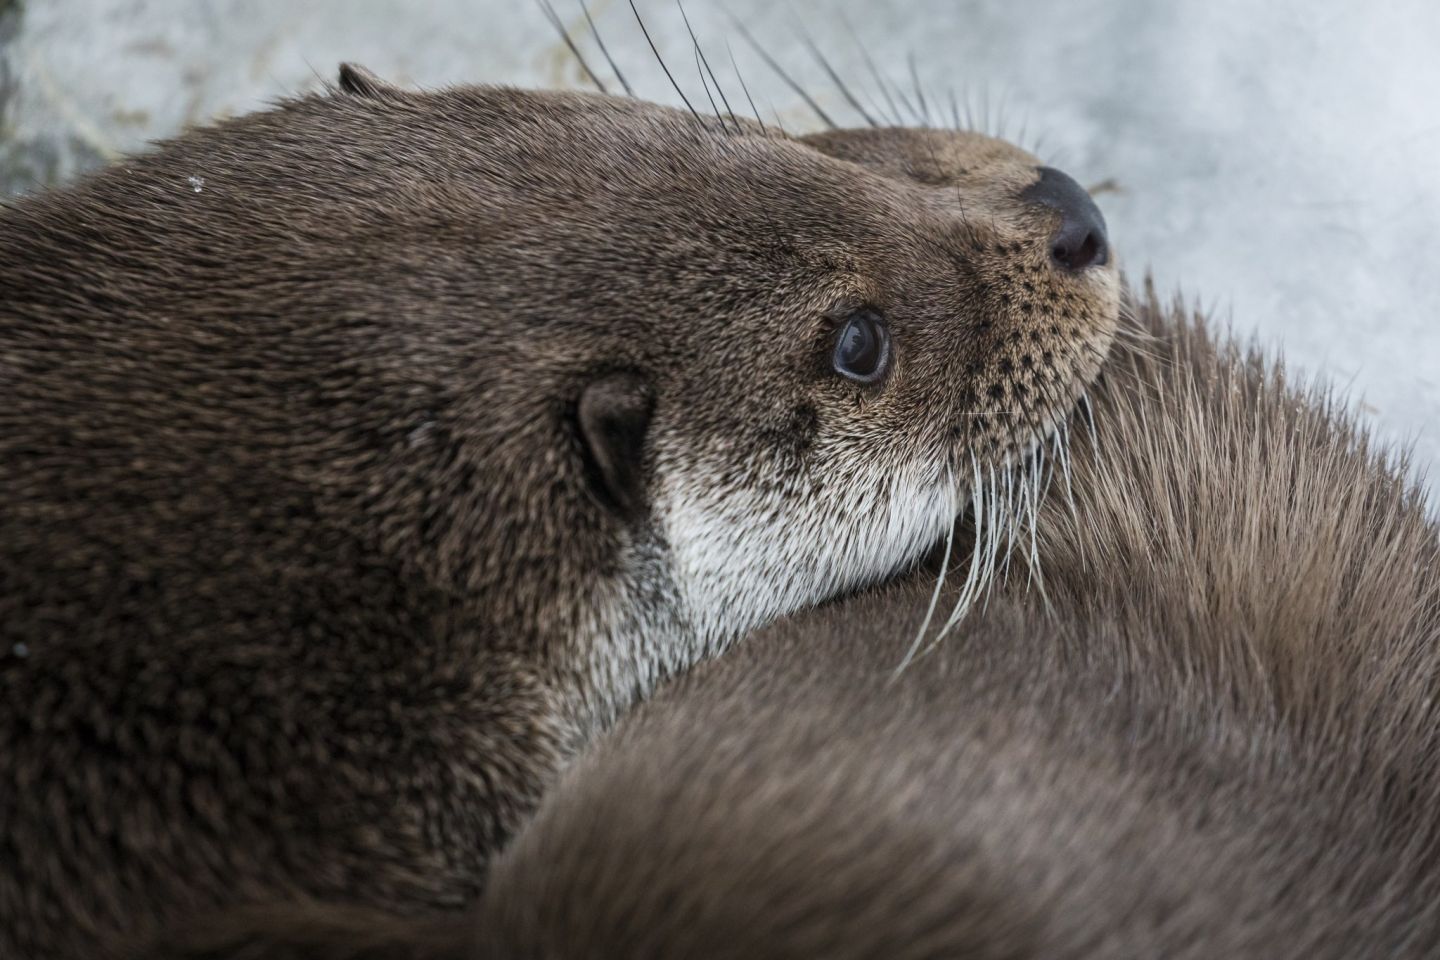 Otters, part of the Arctic wildlife you'll find in Finnish Lapland